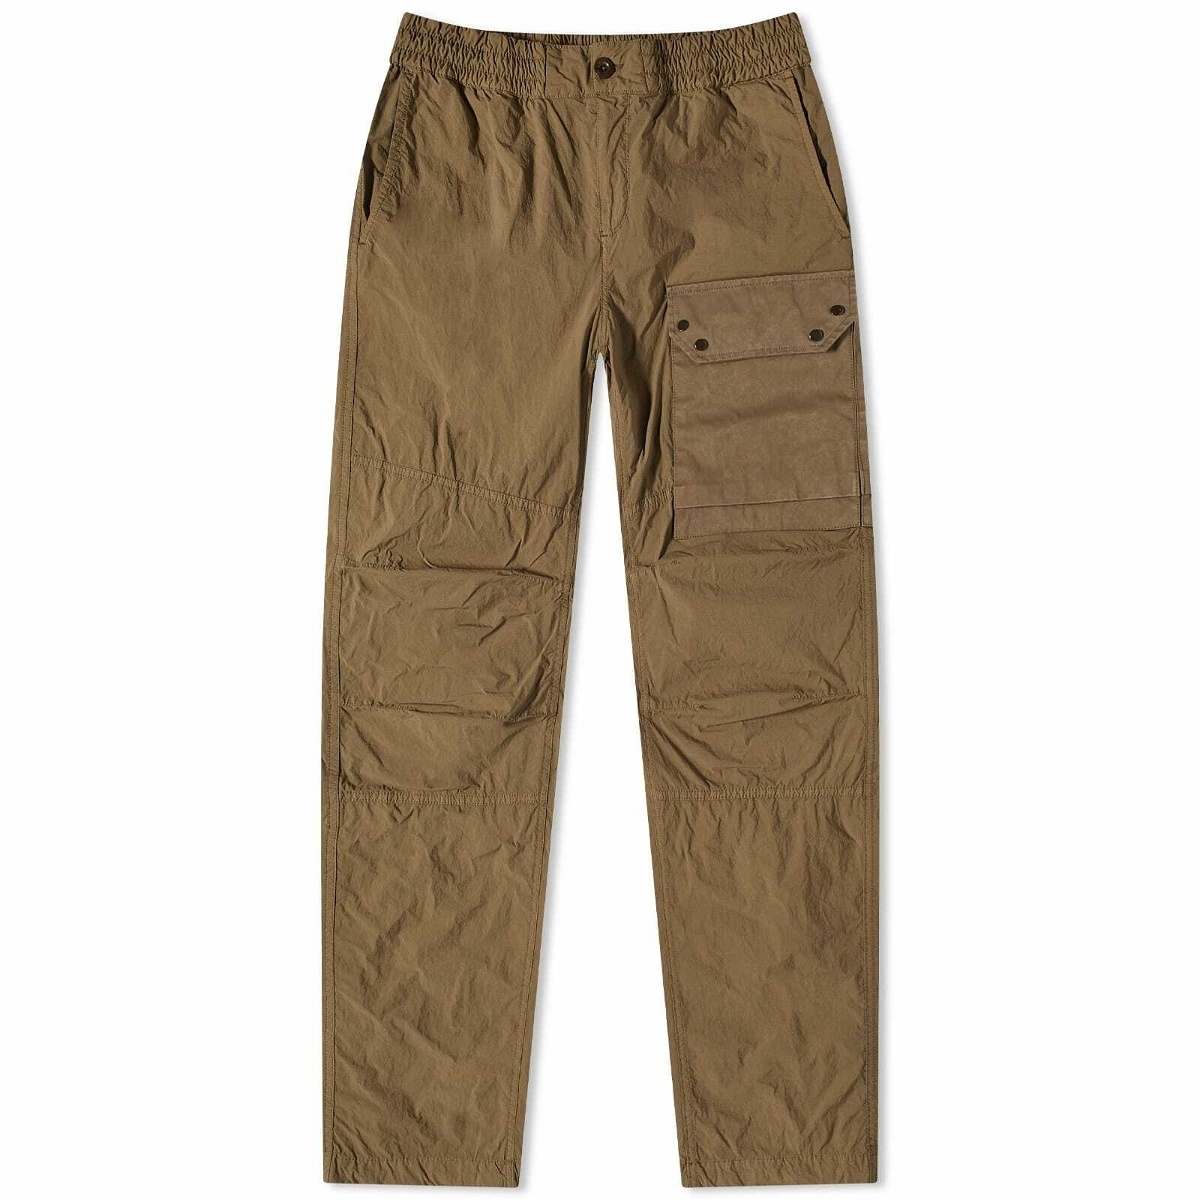 Lenago Cargo Pants for Men's Cargo Trousers Work Wear Combat Safety Cargo 6  Pocket Full Pants on Clearance under 10 - Walmart.com